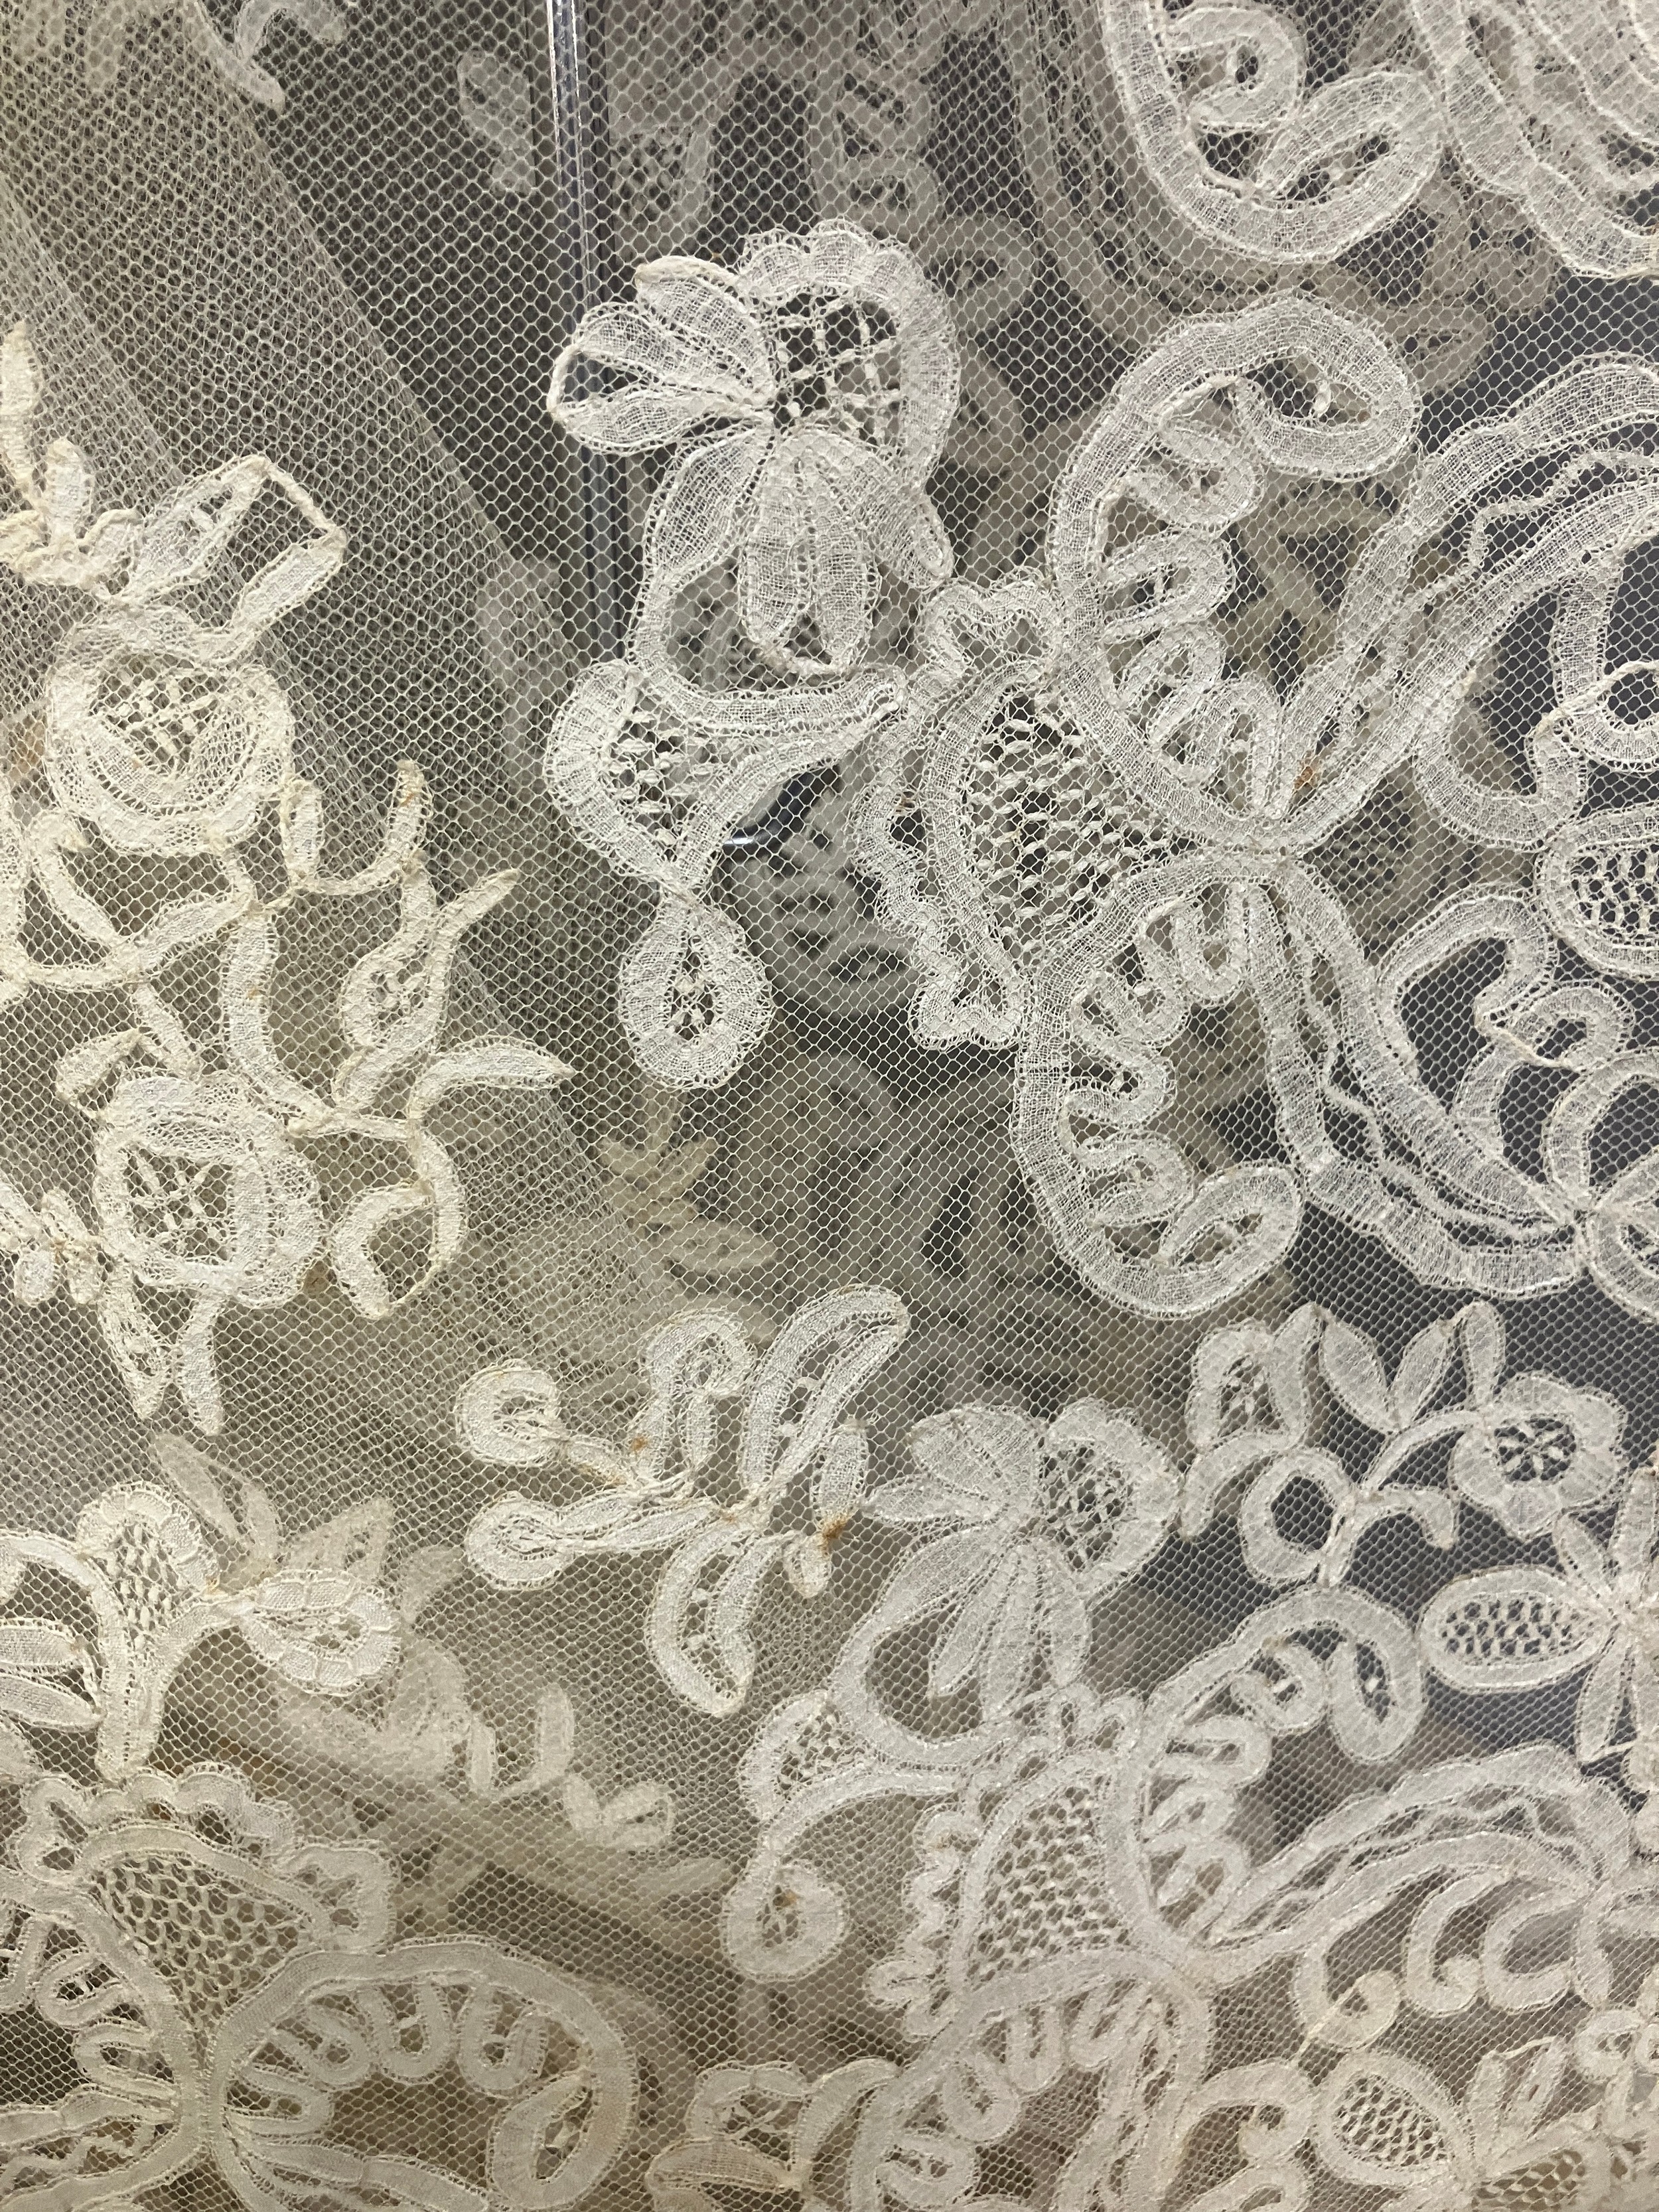 A very large and fine quality late 19th century wedding veil, Honiton Bobbin Appliqué, deep lace - Image 2 of 6